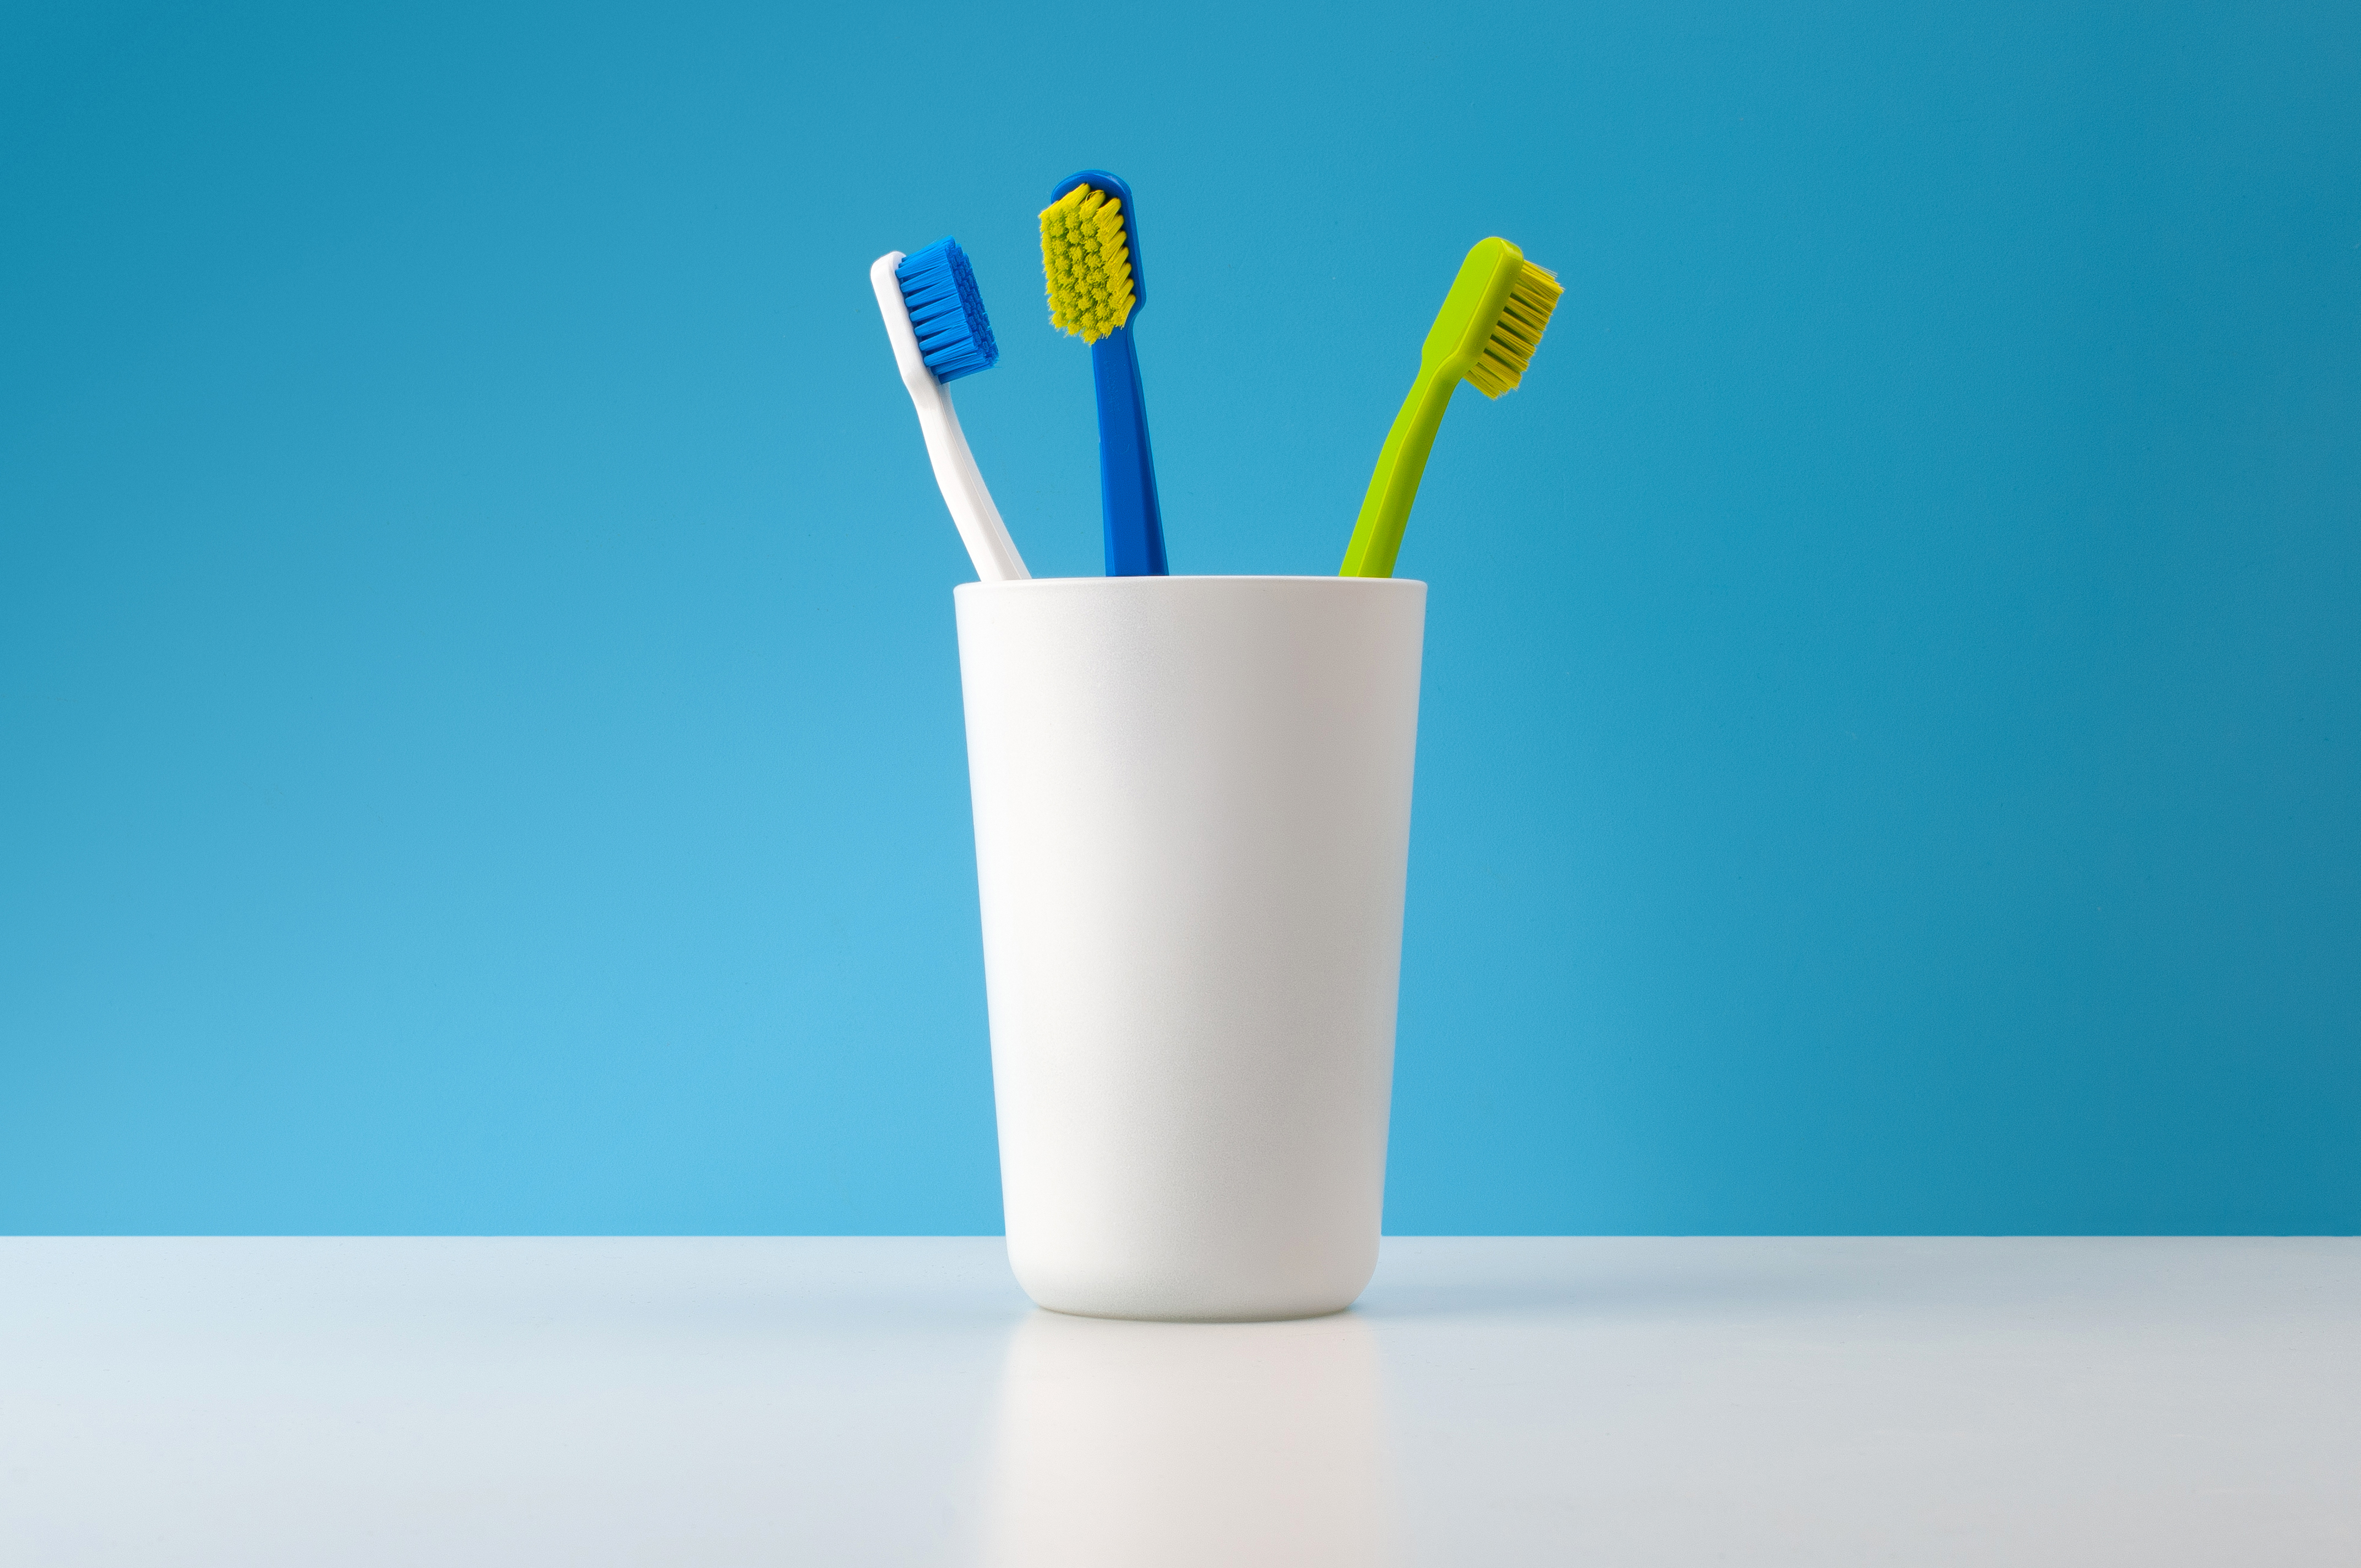 Toothbrush Cs5460 Green Blue White Cup